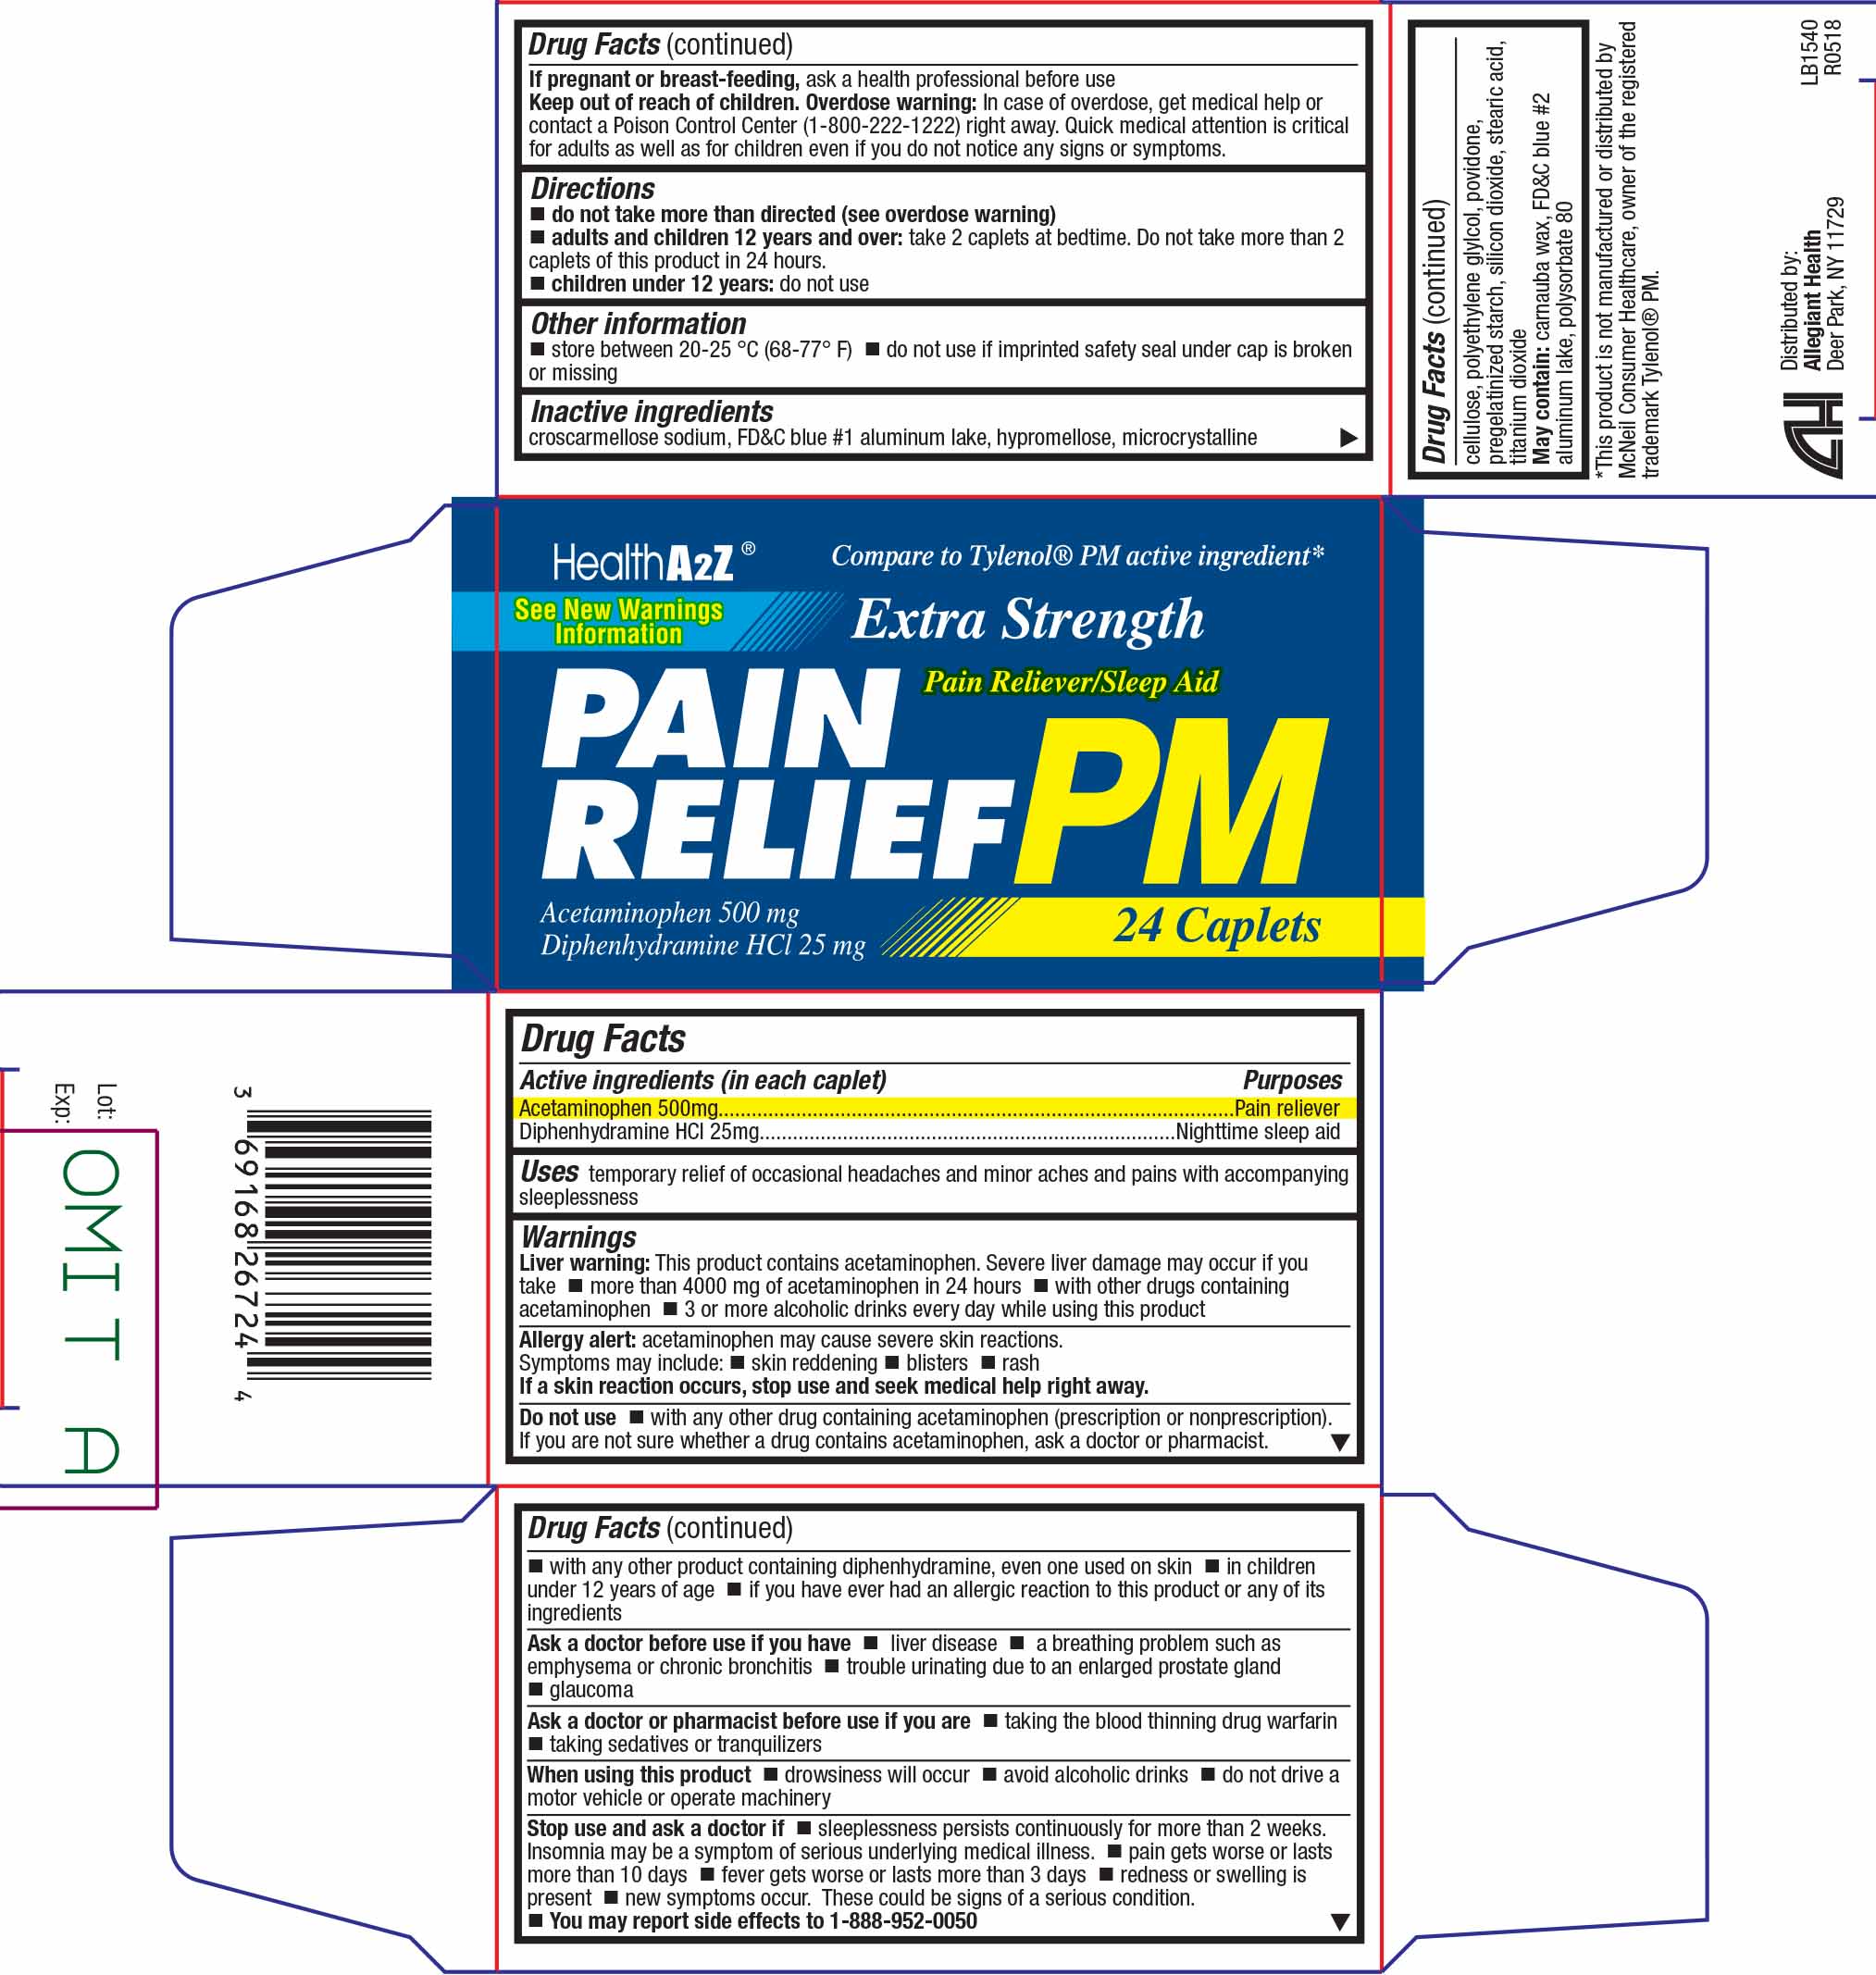 Pain relief PM